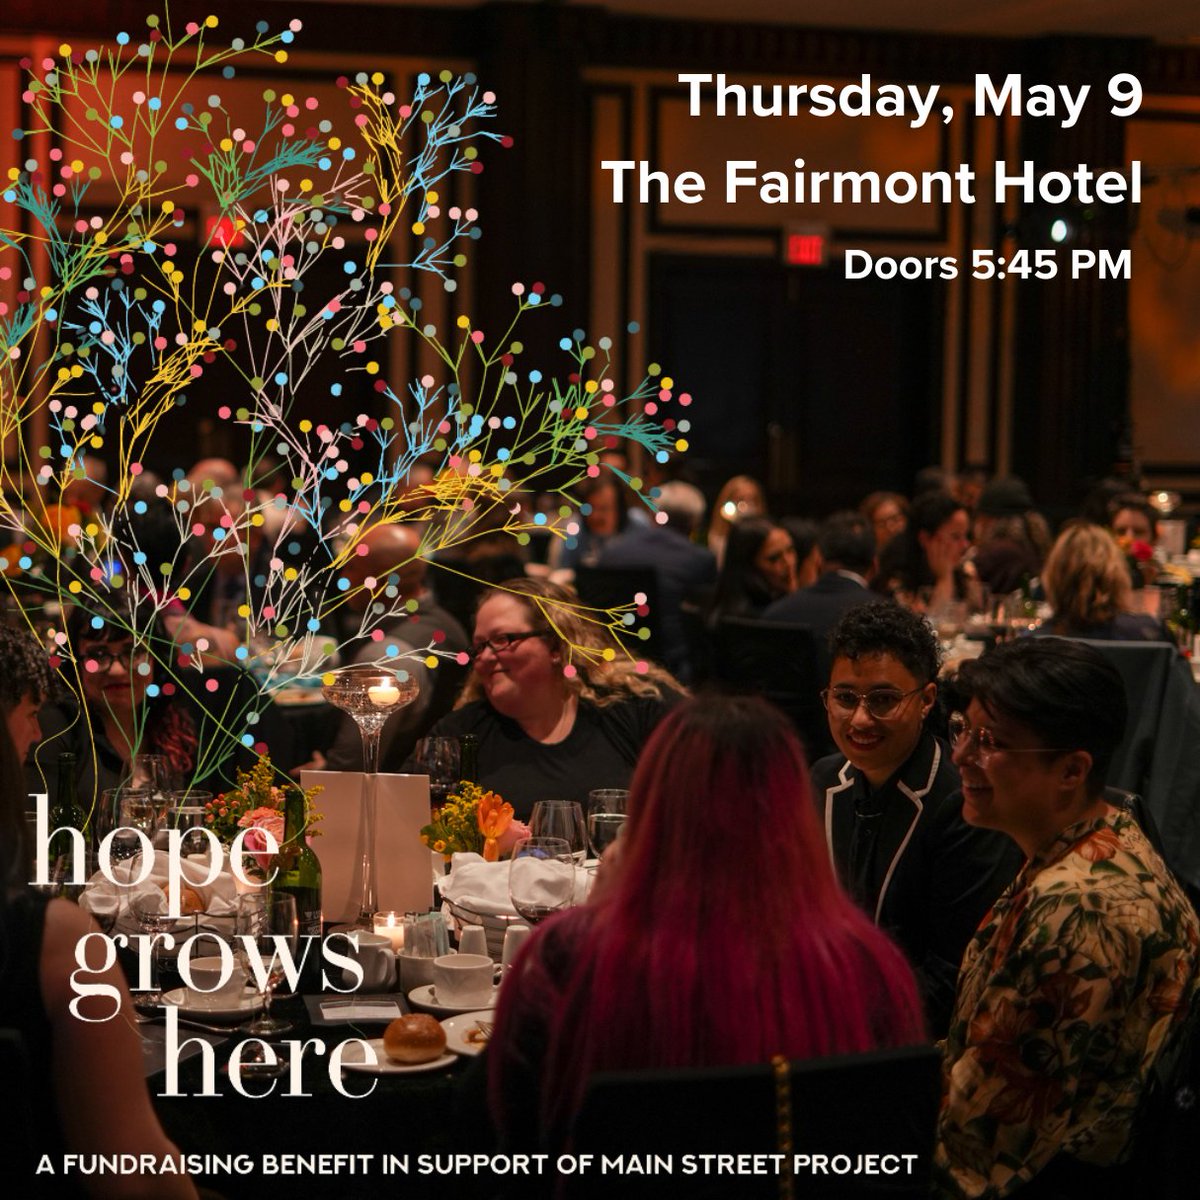 Mark your calendars for May 9th and secure your spot at Hope Grows Here. Early bird tickets are on sale now for only $225. After April 15th, tickets will be sold at the regular price of $250. Get your tickets now at the link in bio! #MSPBuildingStability #Winnipeg #Manitoba